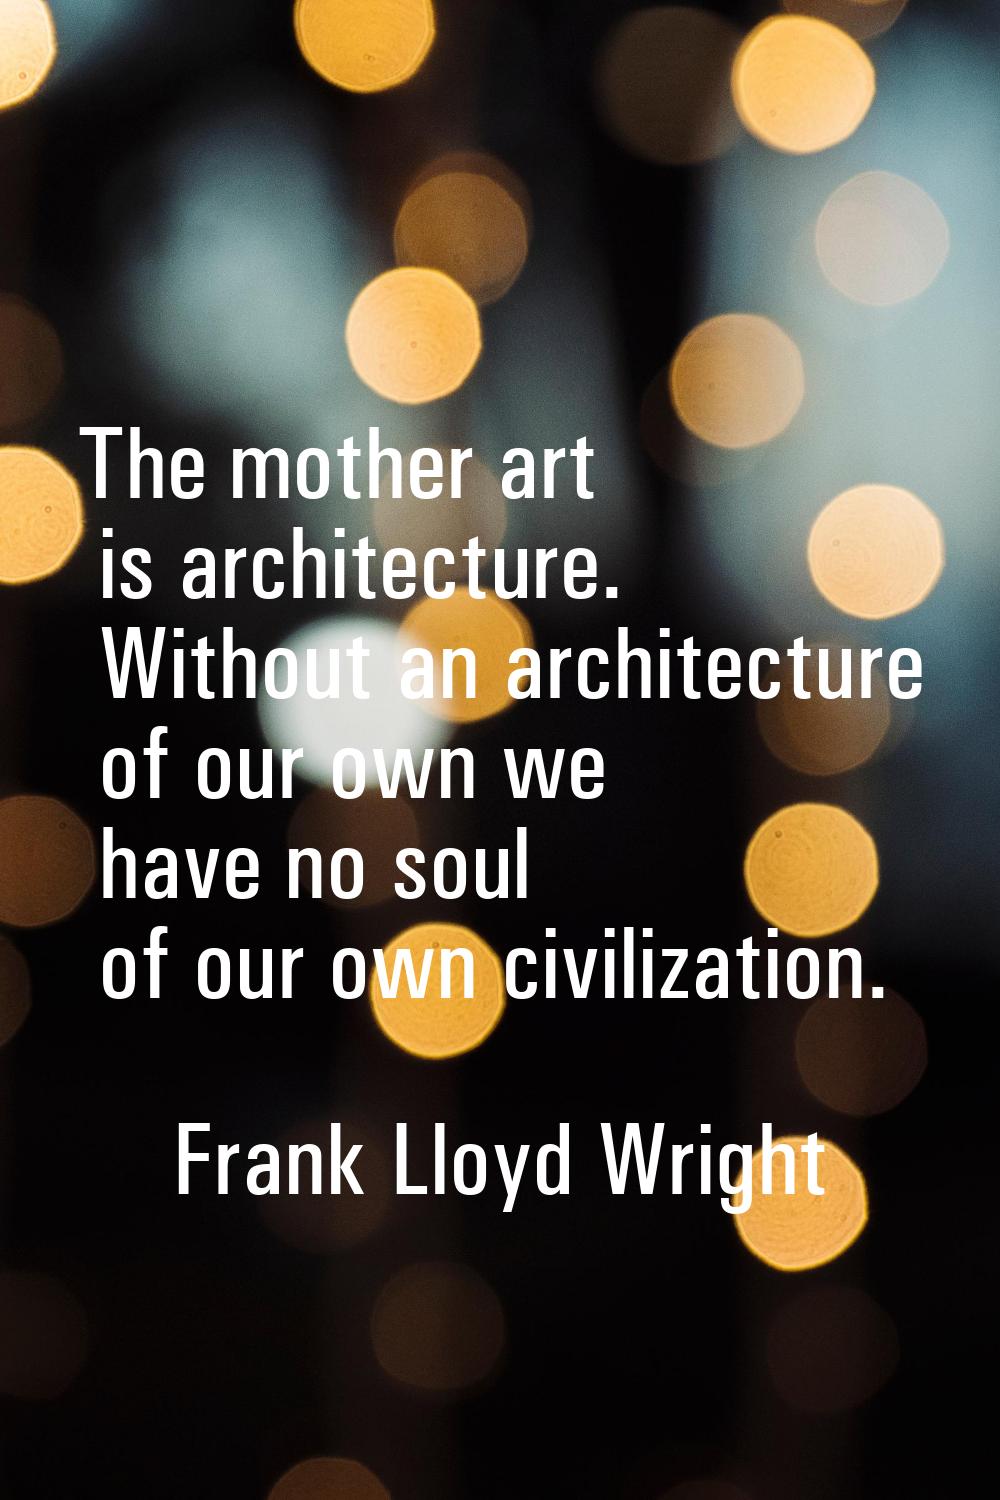 The mother art is architecture. Without an architecture of our own we have no soul of our own civil